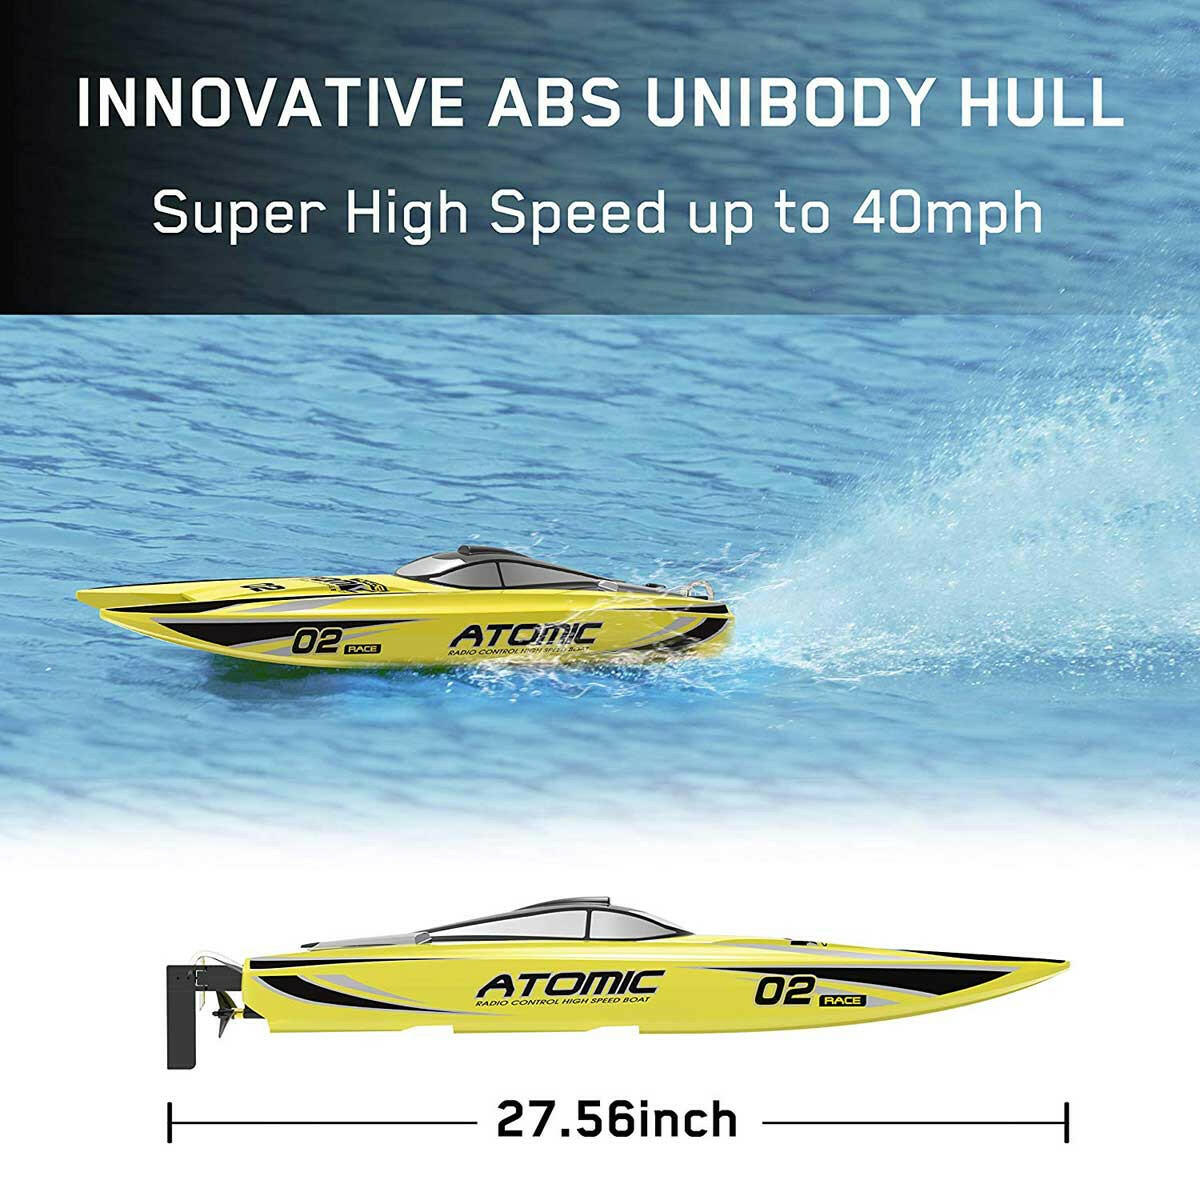 Atomic 45mph High Speed Lake Racing Remote Control RC Boat (792-4) RTR - EXHOBBY